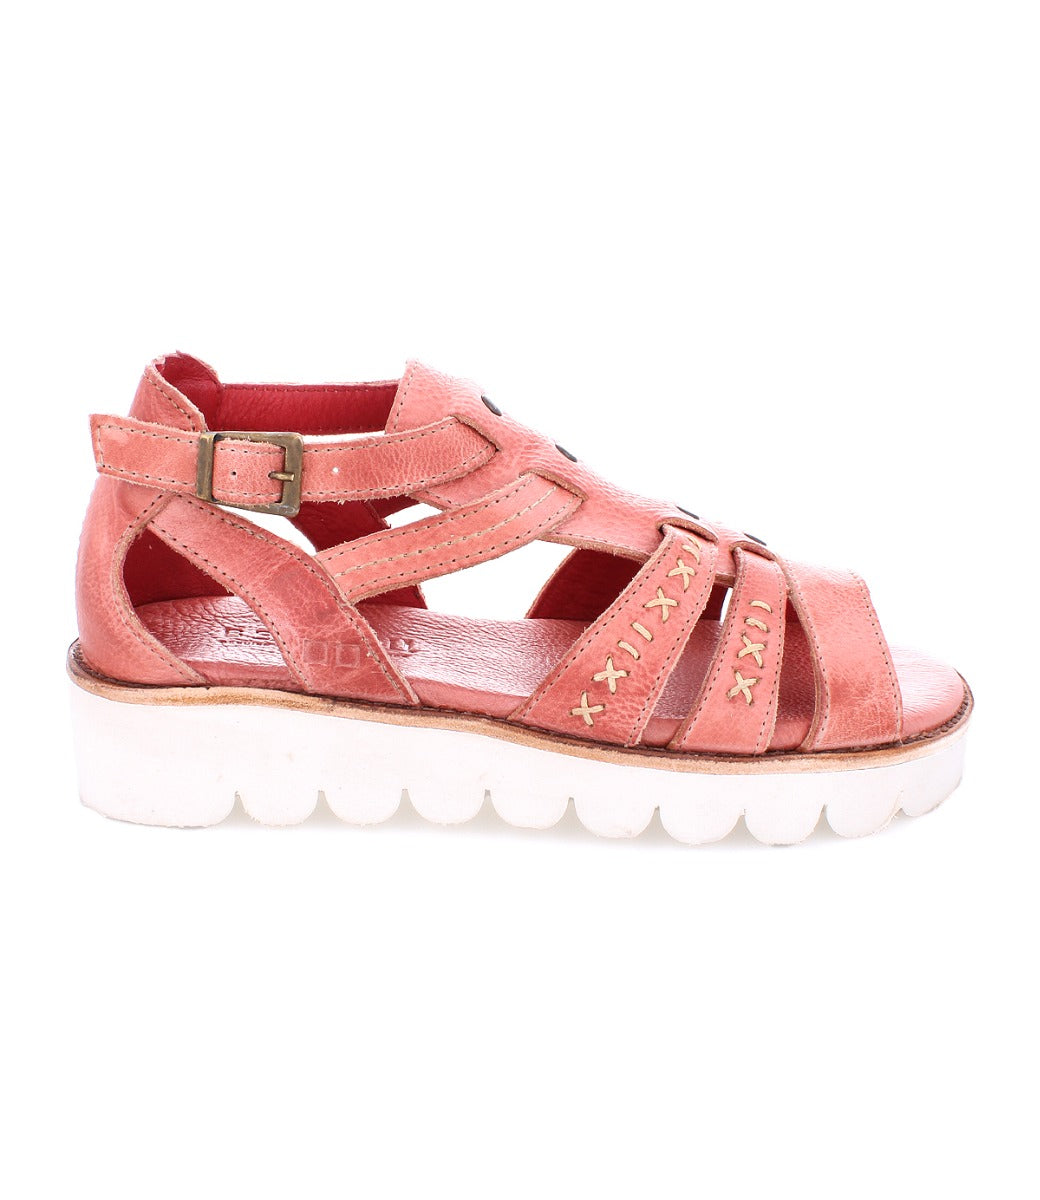 A women's pink Wonder sandal with straps and a white sole by Bed Stu.